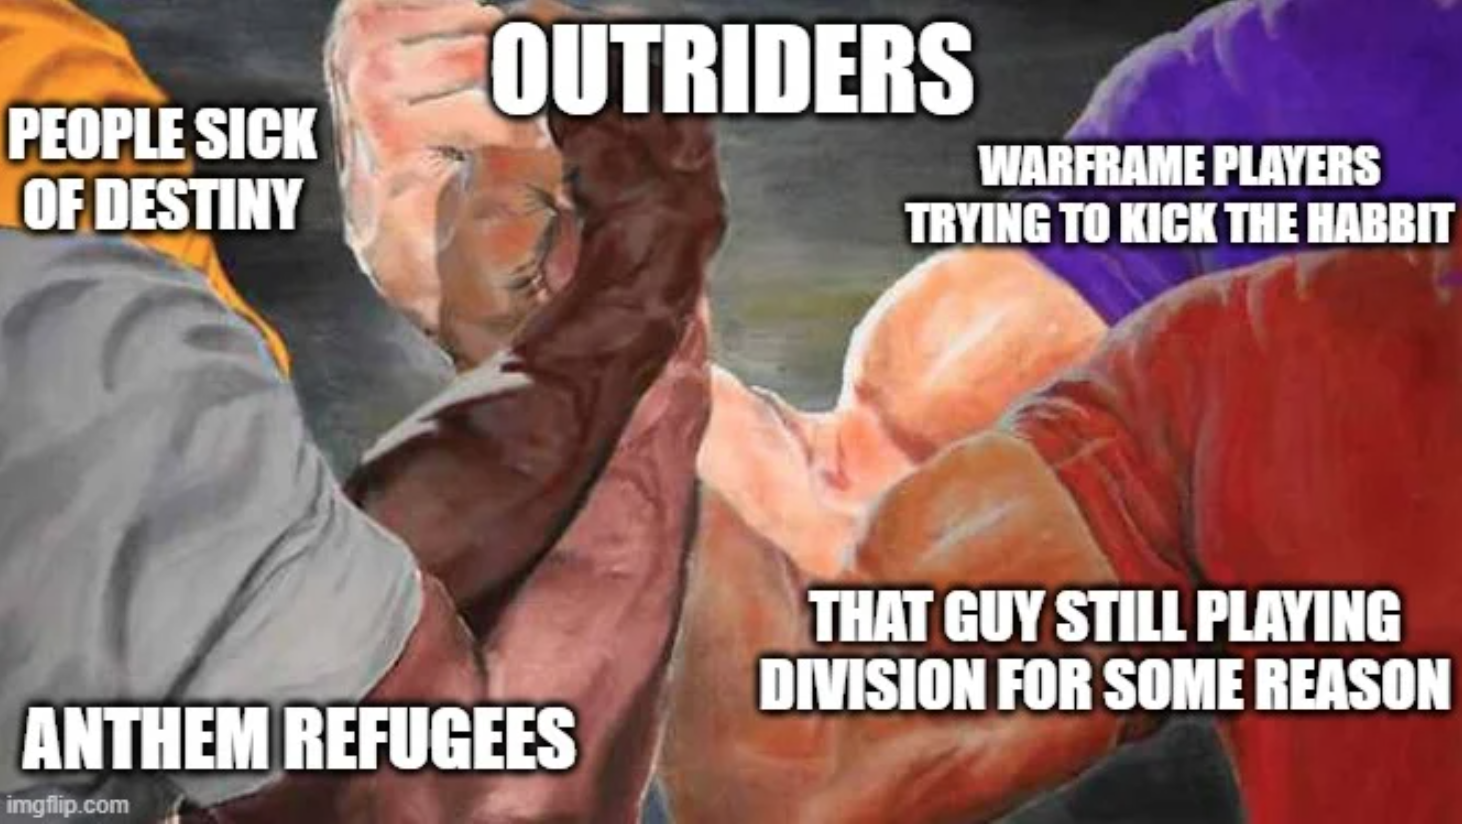 Outriders Memes - outriders meme - Outriders People Sick Of Destiny Warframe Players Trying To Kick The Habbit That Guy Still Playing Division For Some Reason Anthem Refugees imgflip.com